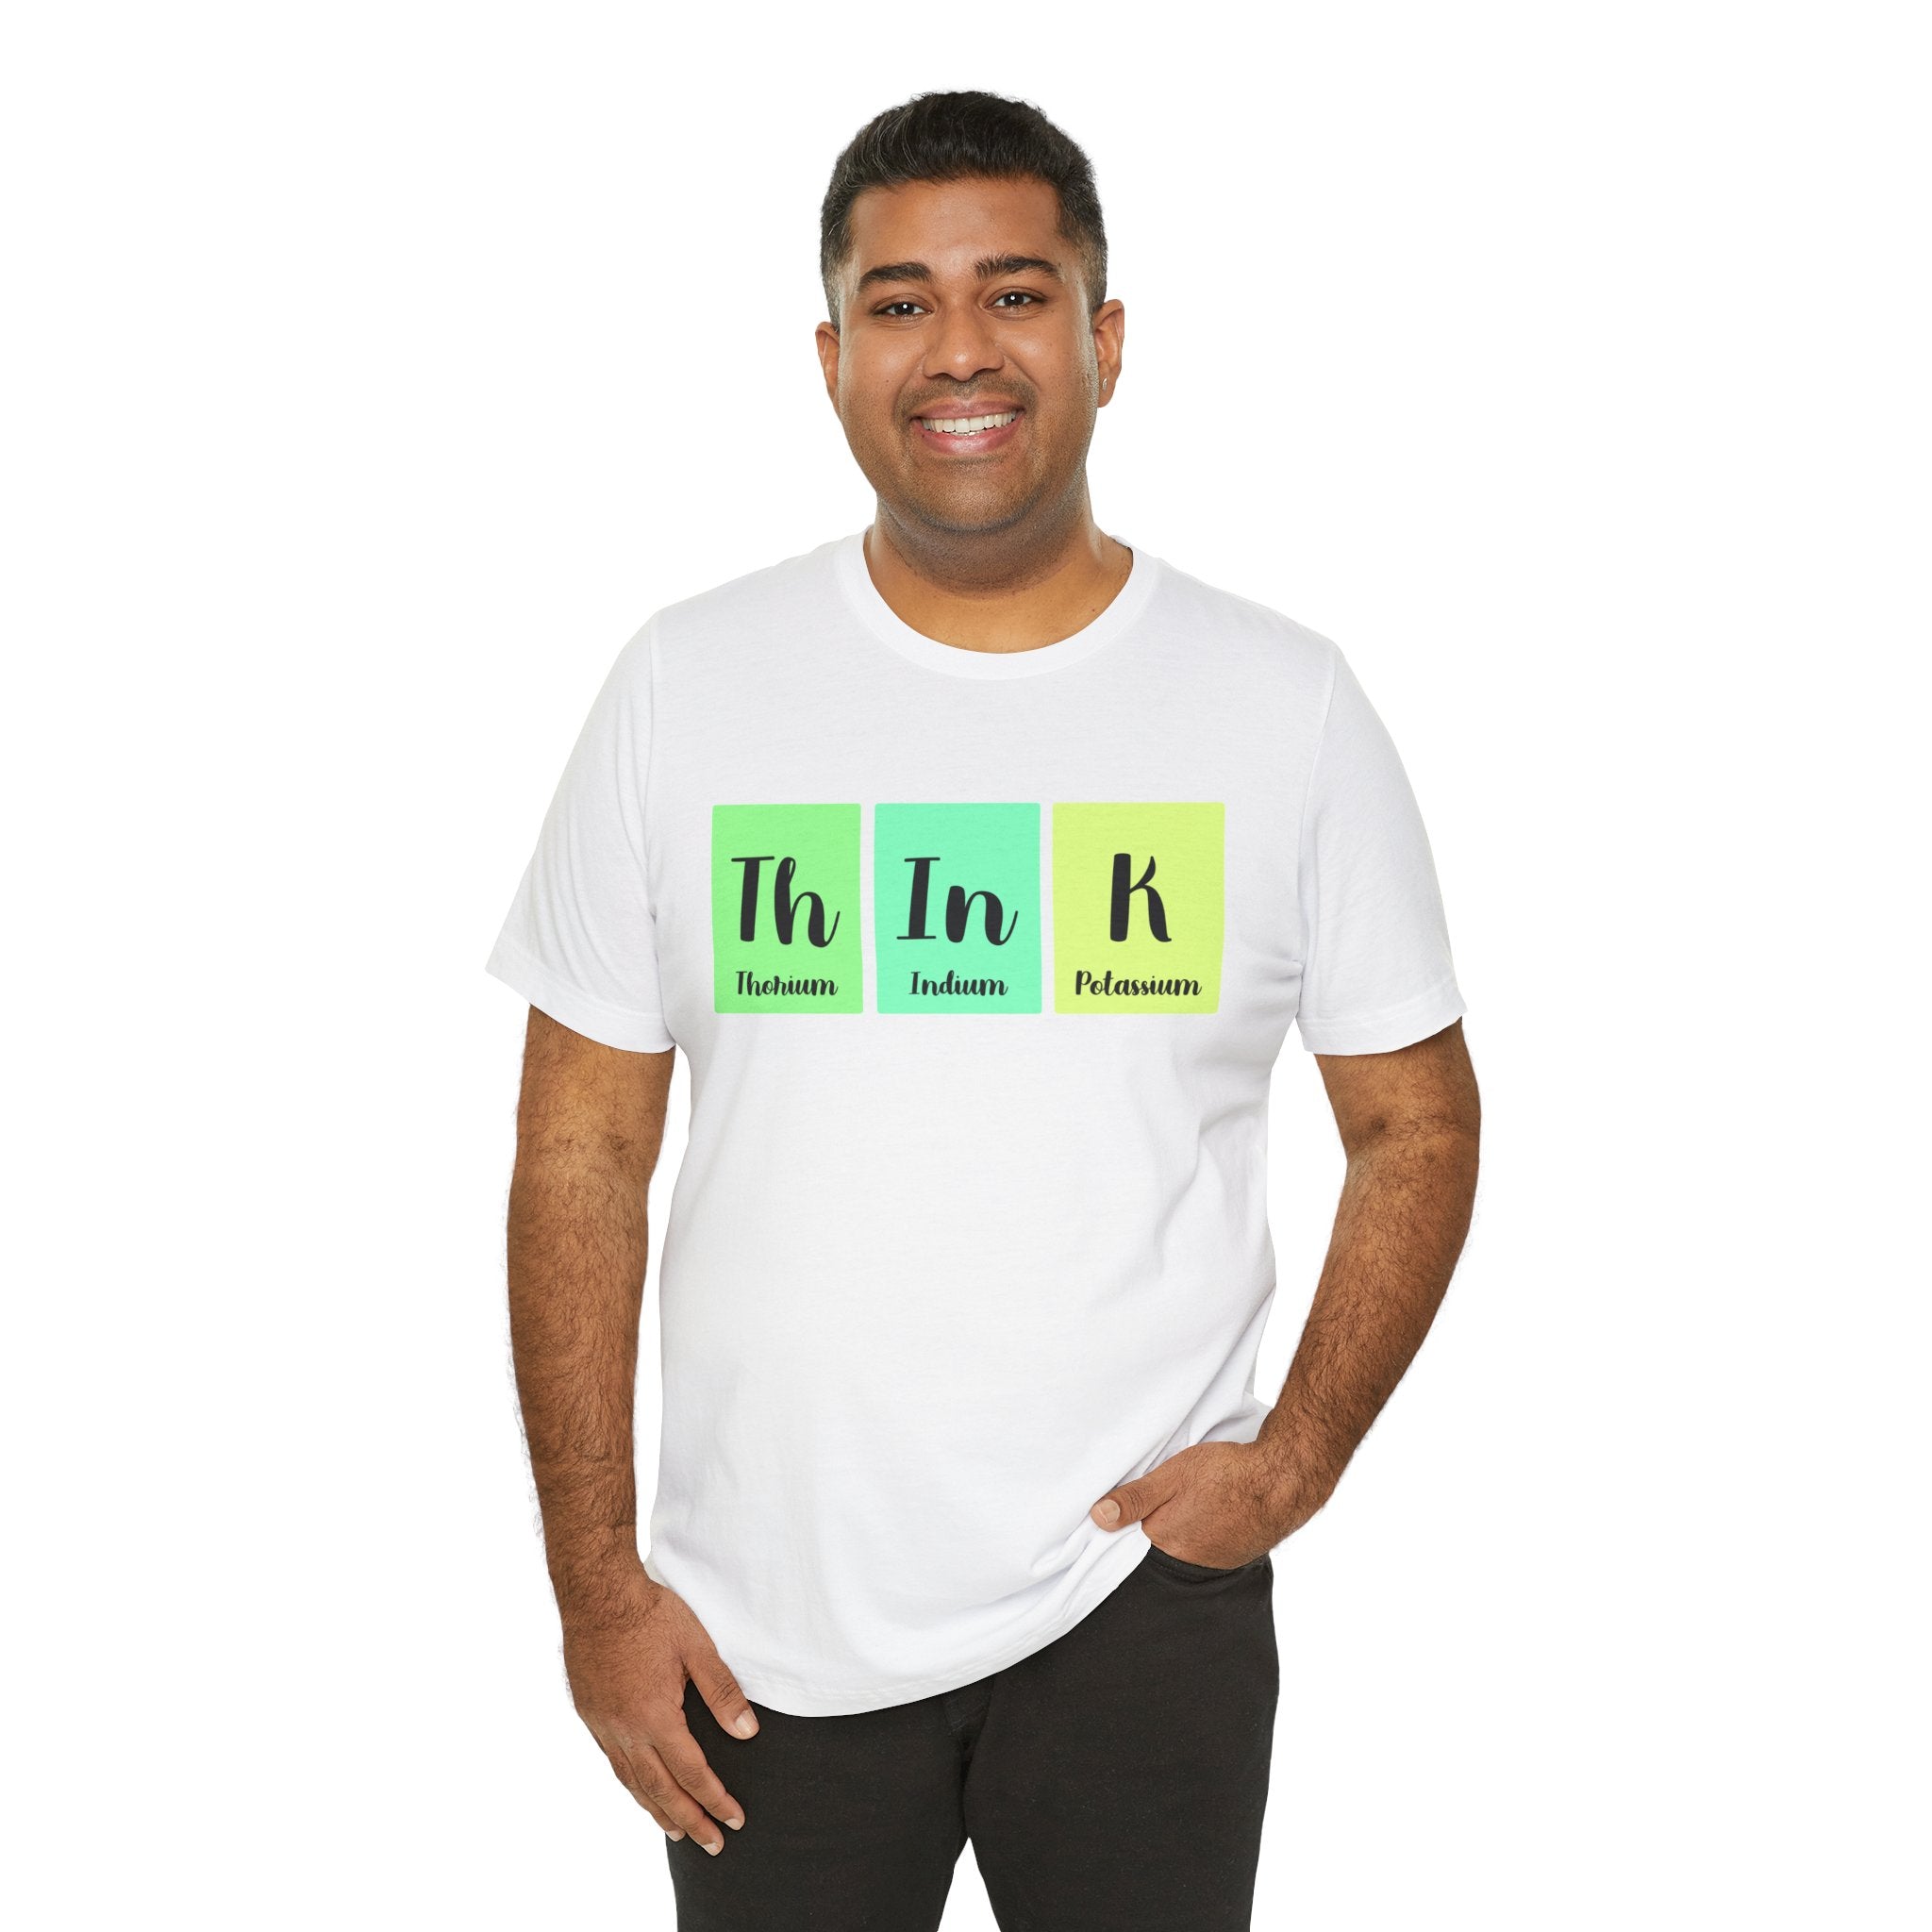 A man smiling at the camera, wearing a Th-In-k unisex jersey tee with "th in k" printed in green, blue, and yellow, representing elements from the periodic table.